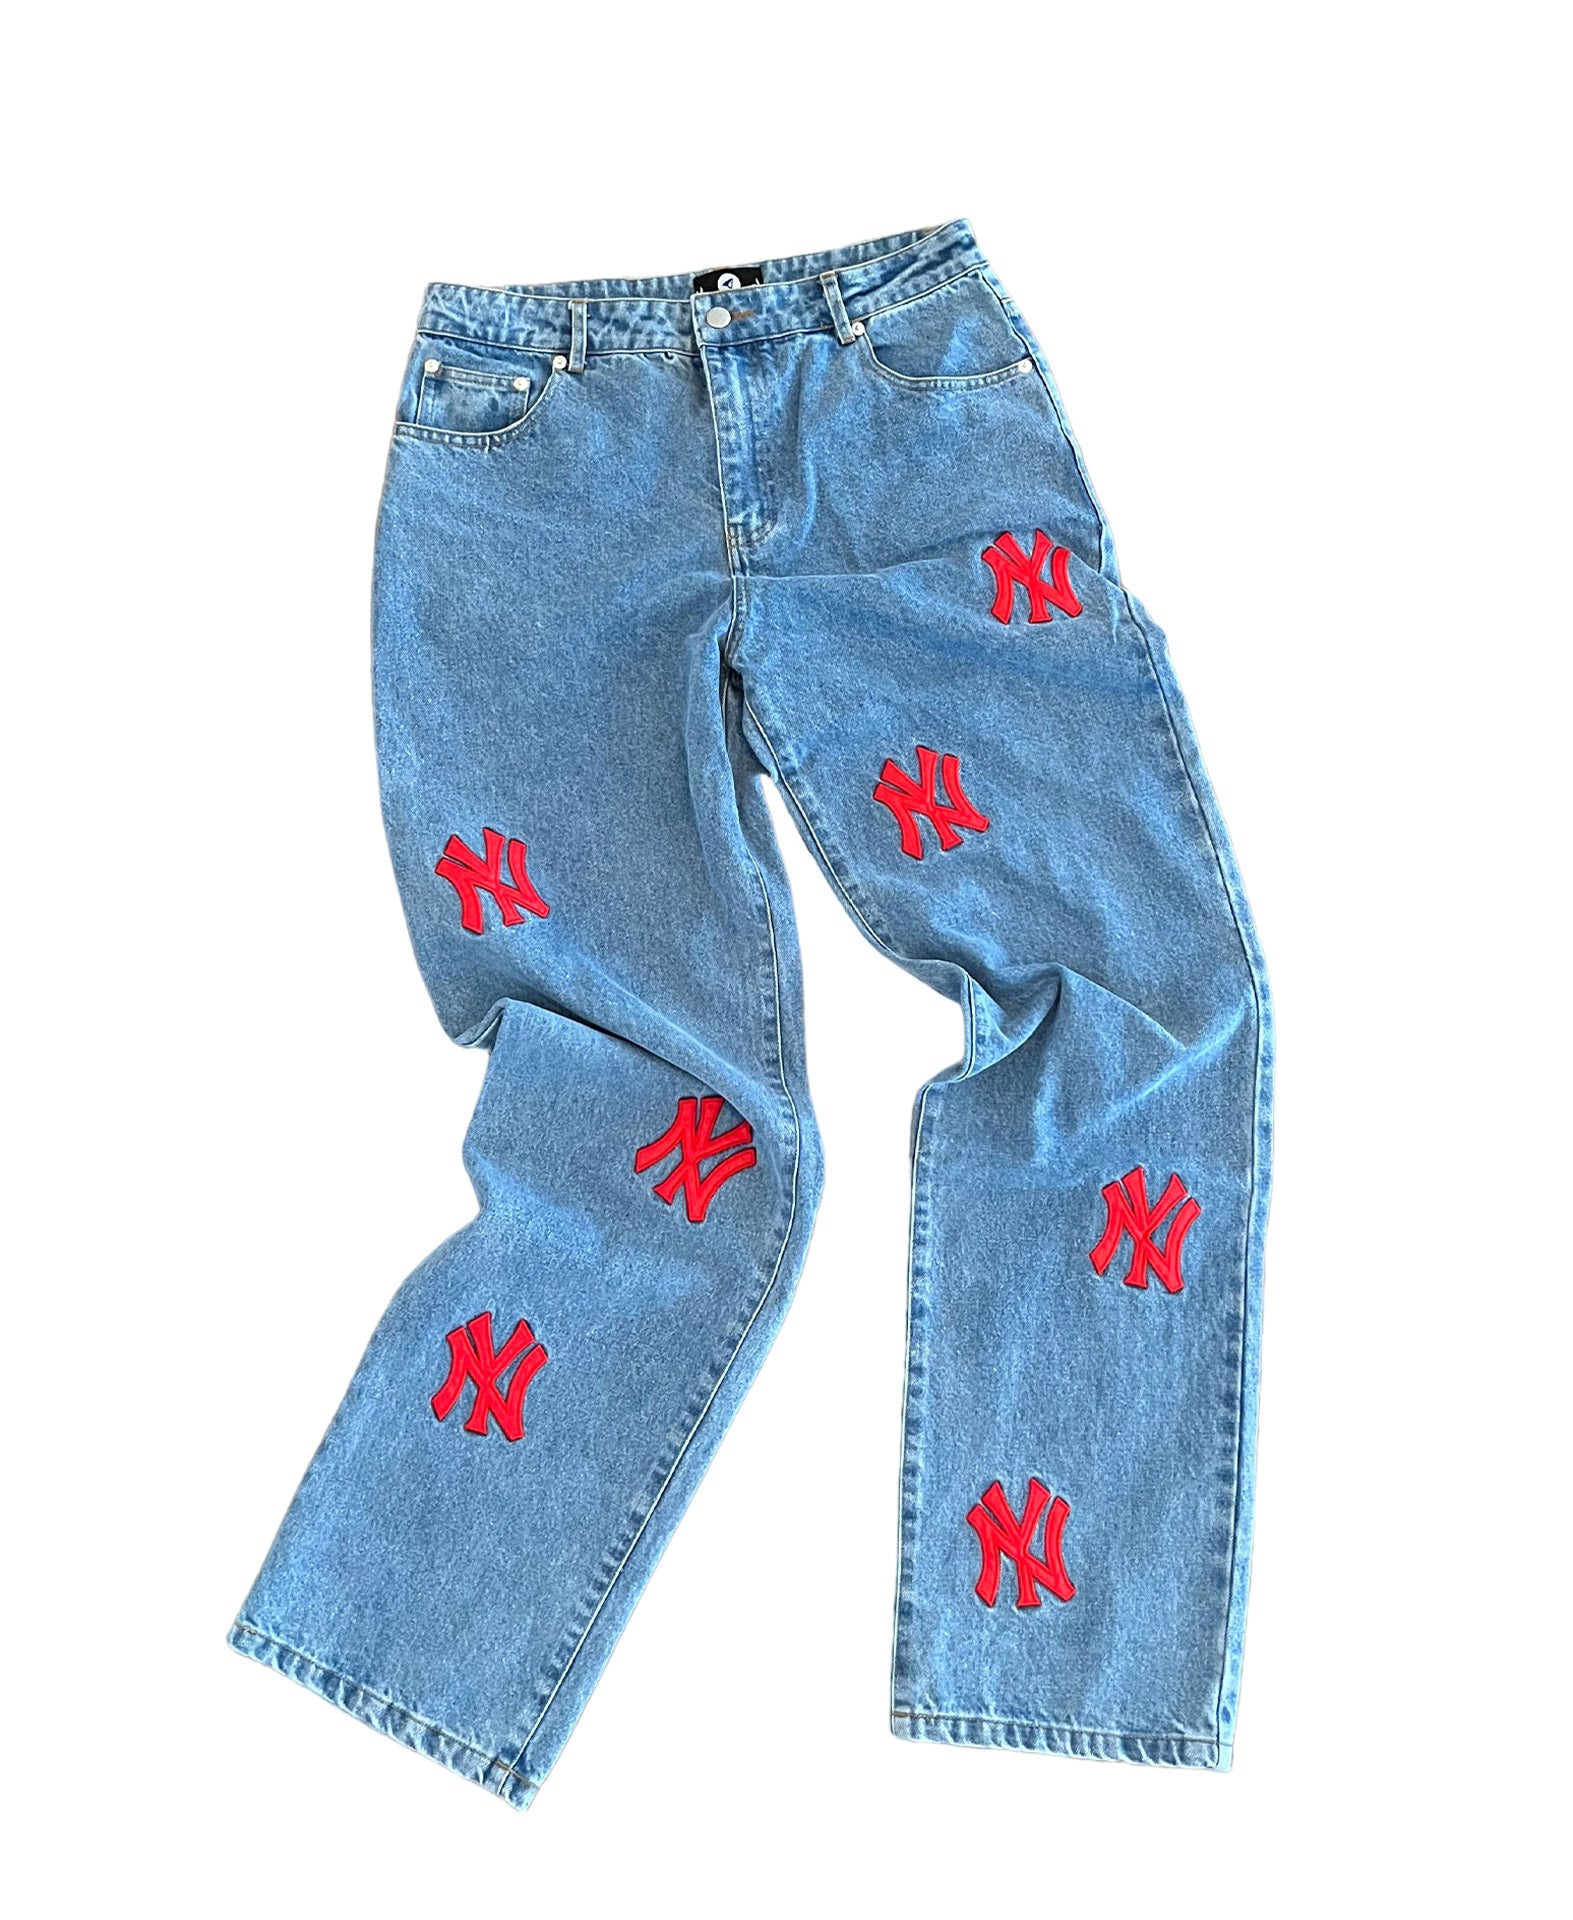 New York Patch Jeans – ABSTRACTBYJULES Blue - wash